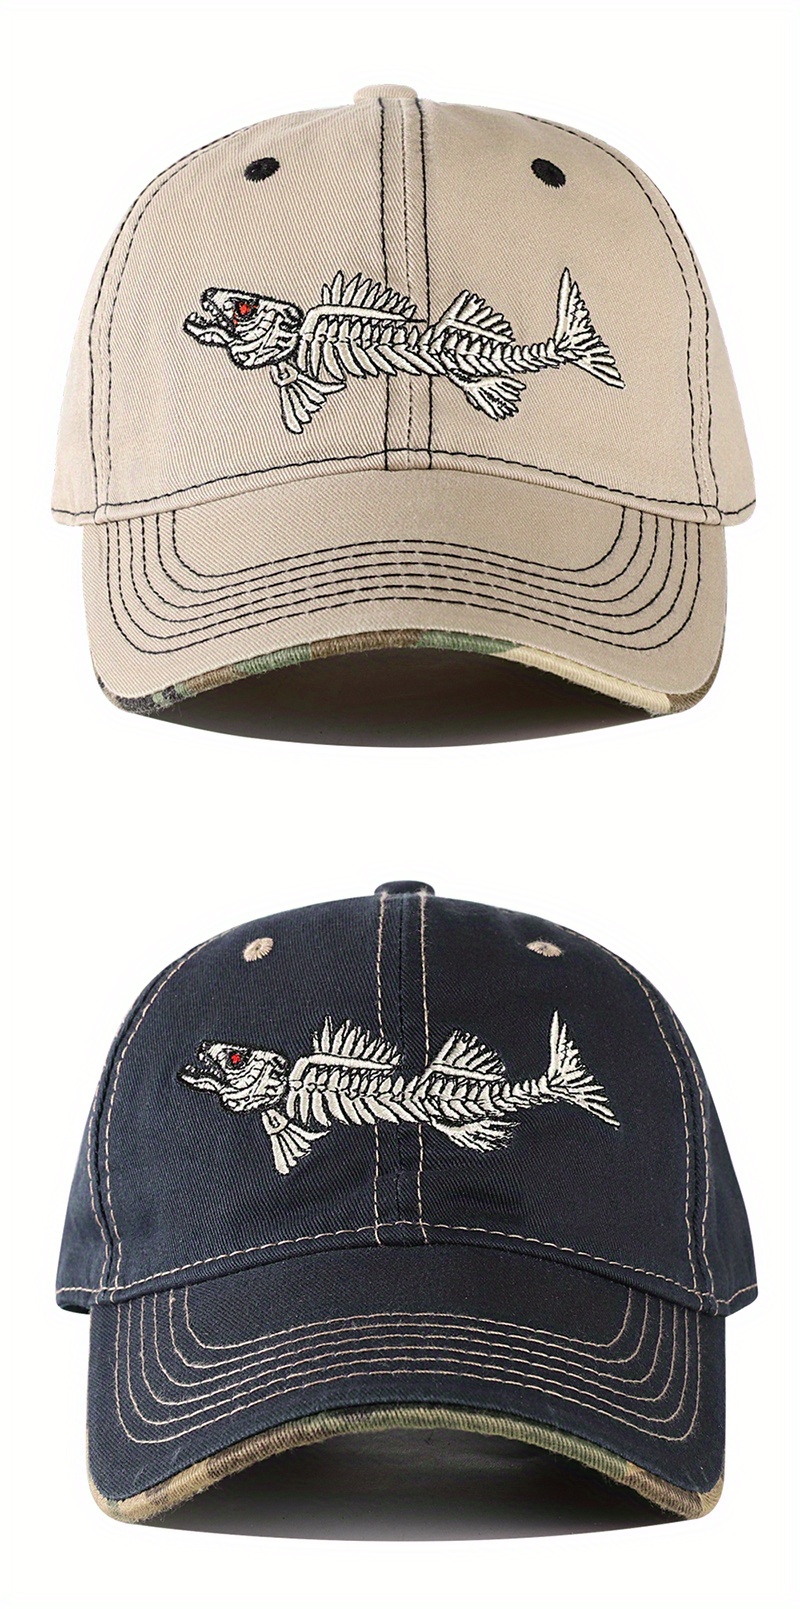 Fenwick Fishing Rods Embroidered Hat Baseball Cap By Madhatter - Artistshot